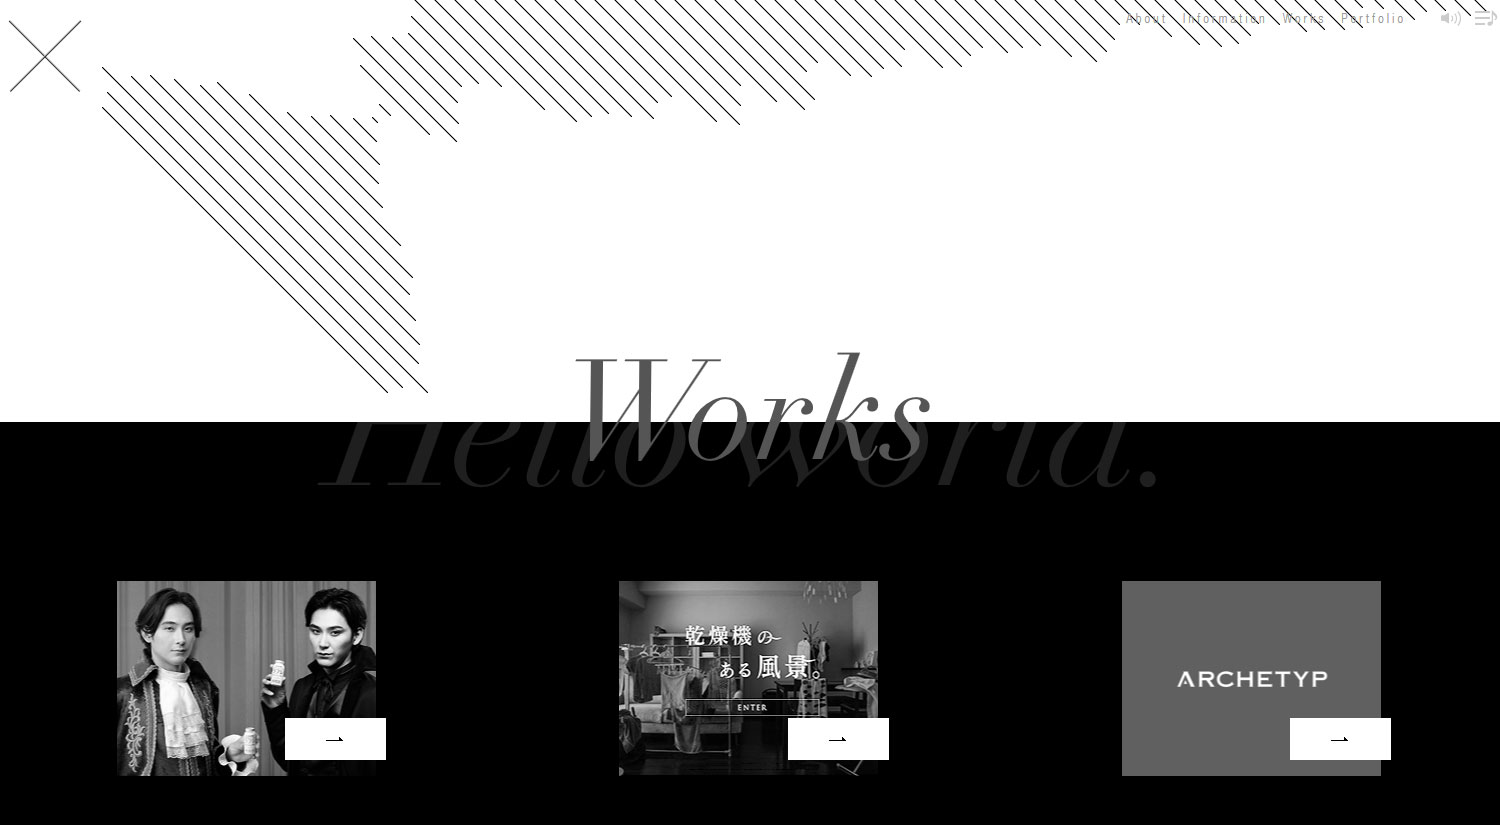 S5-Style Hello world. - Website of the Day